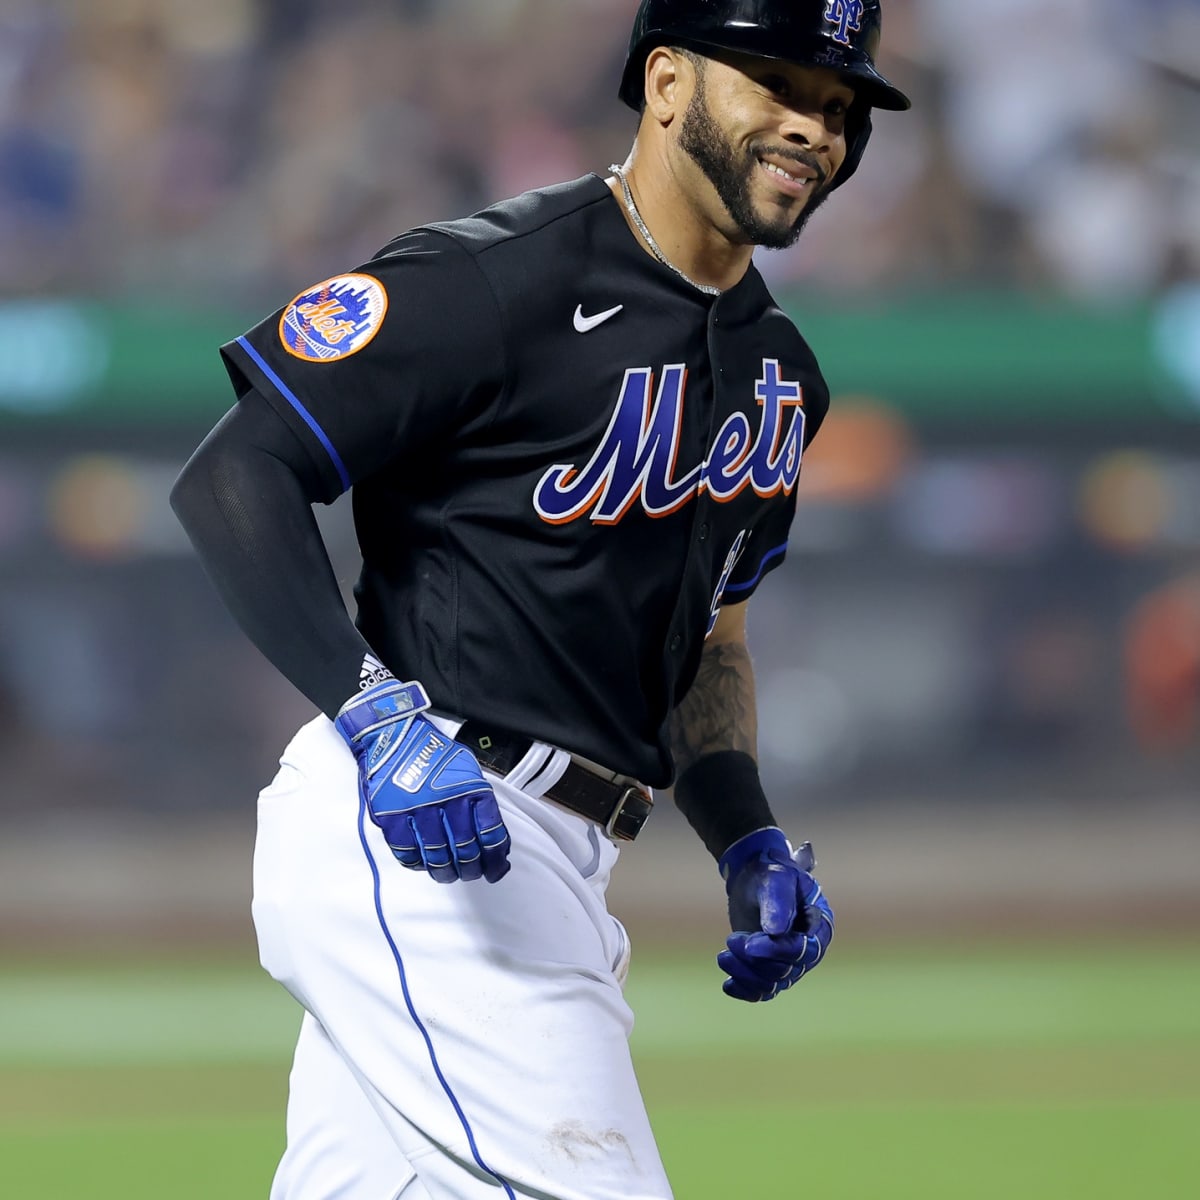 Mets bolstering bench depth with Tommy Pham